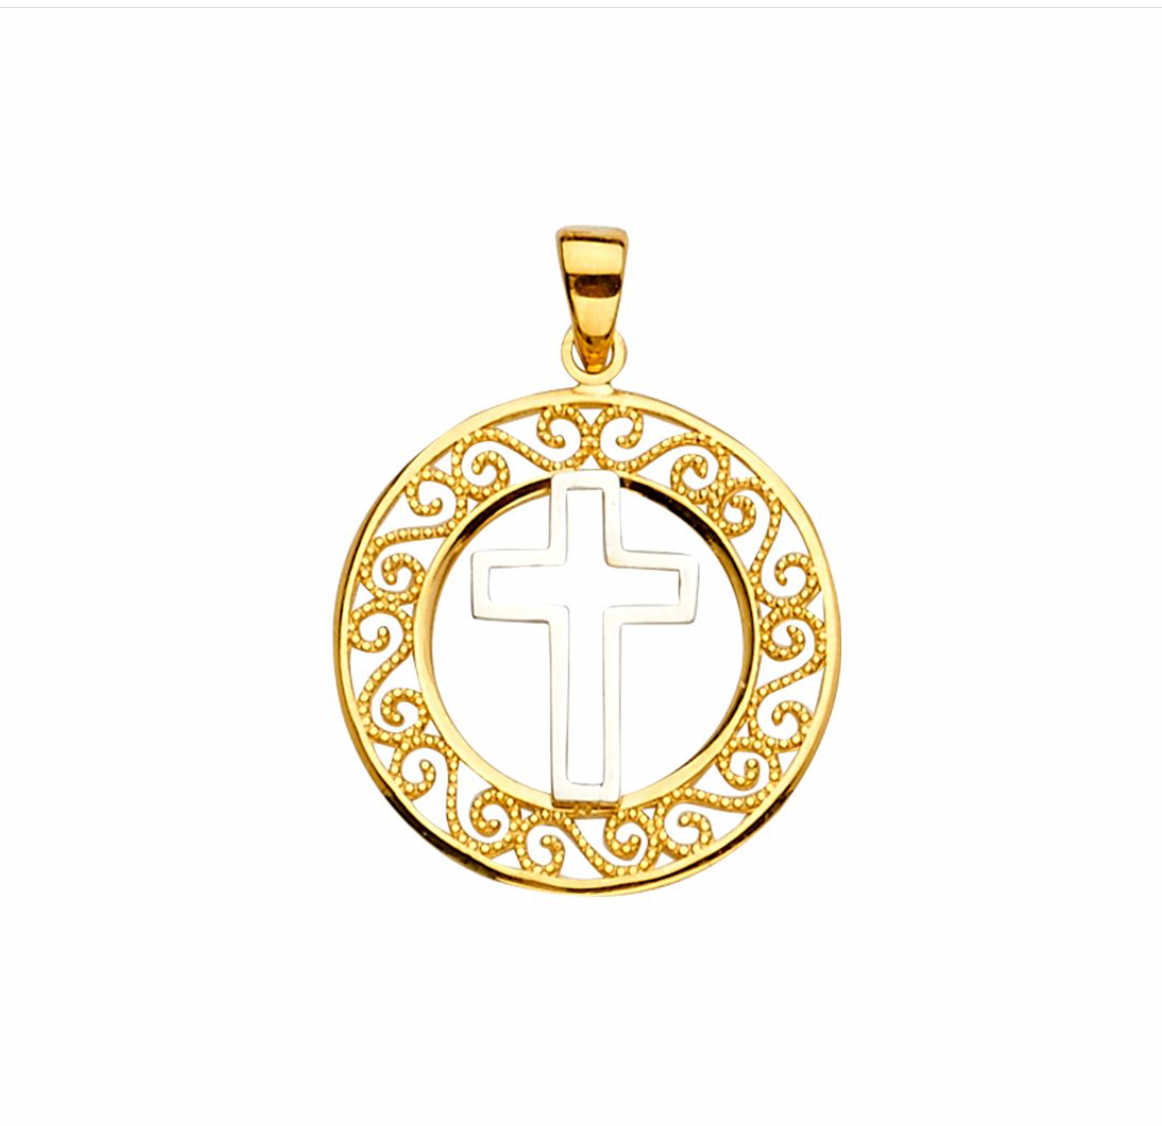 Gold 2 Tone Round Pendant with Cross Pendant Model-2230 - Charlie & Co. Jewelry